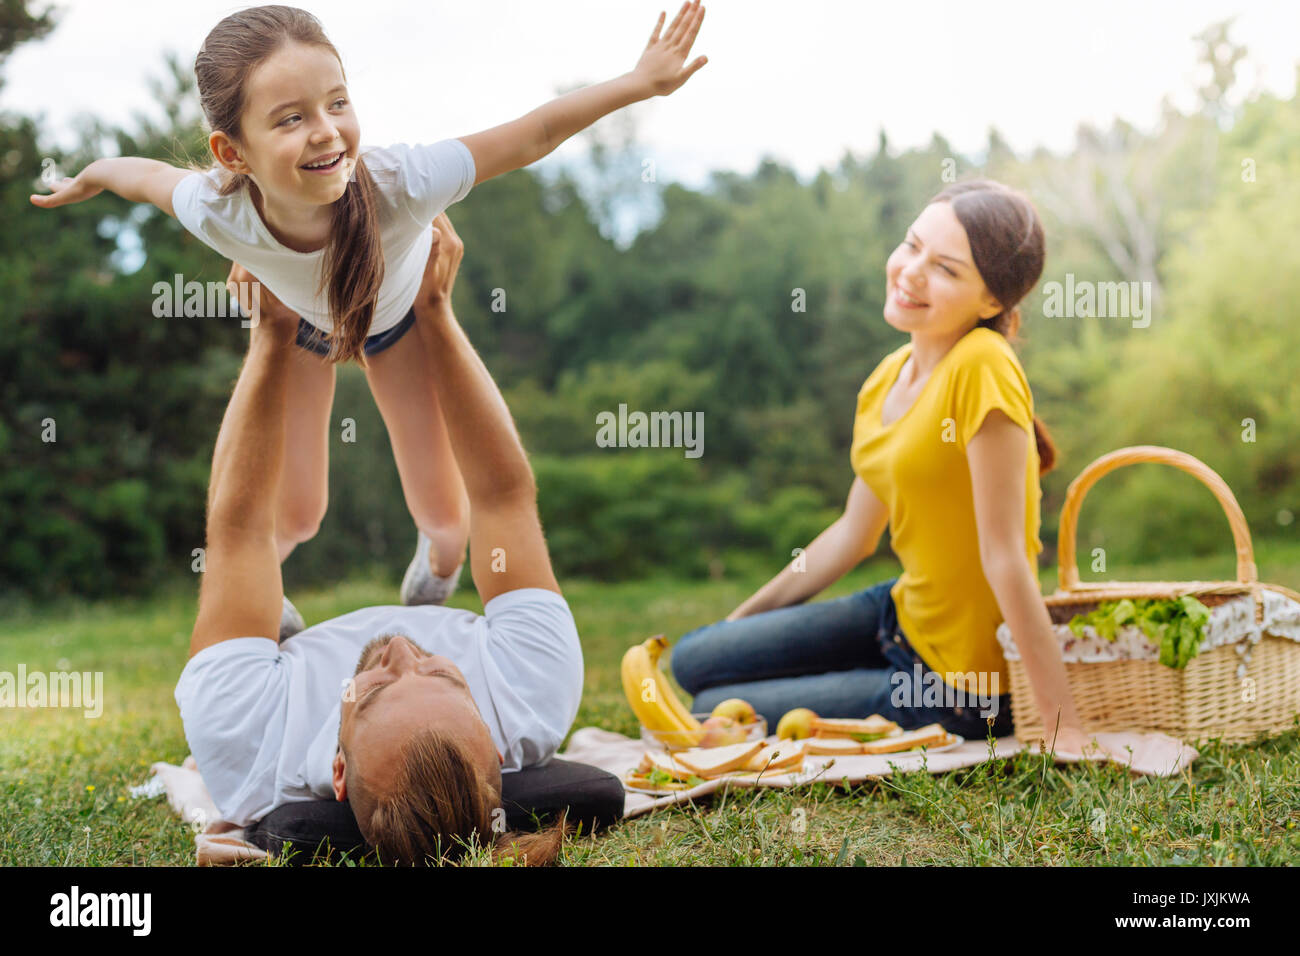 Adorable girl being lifted up by her loving father Stock Photo